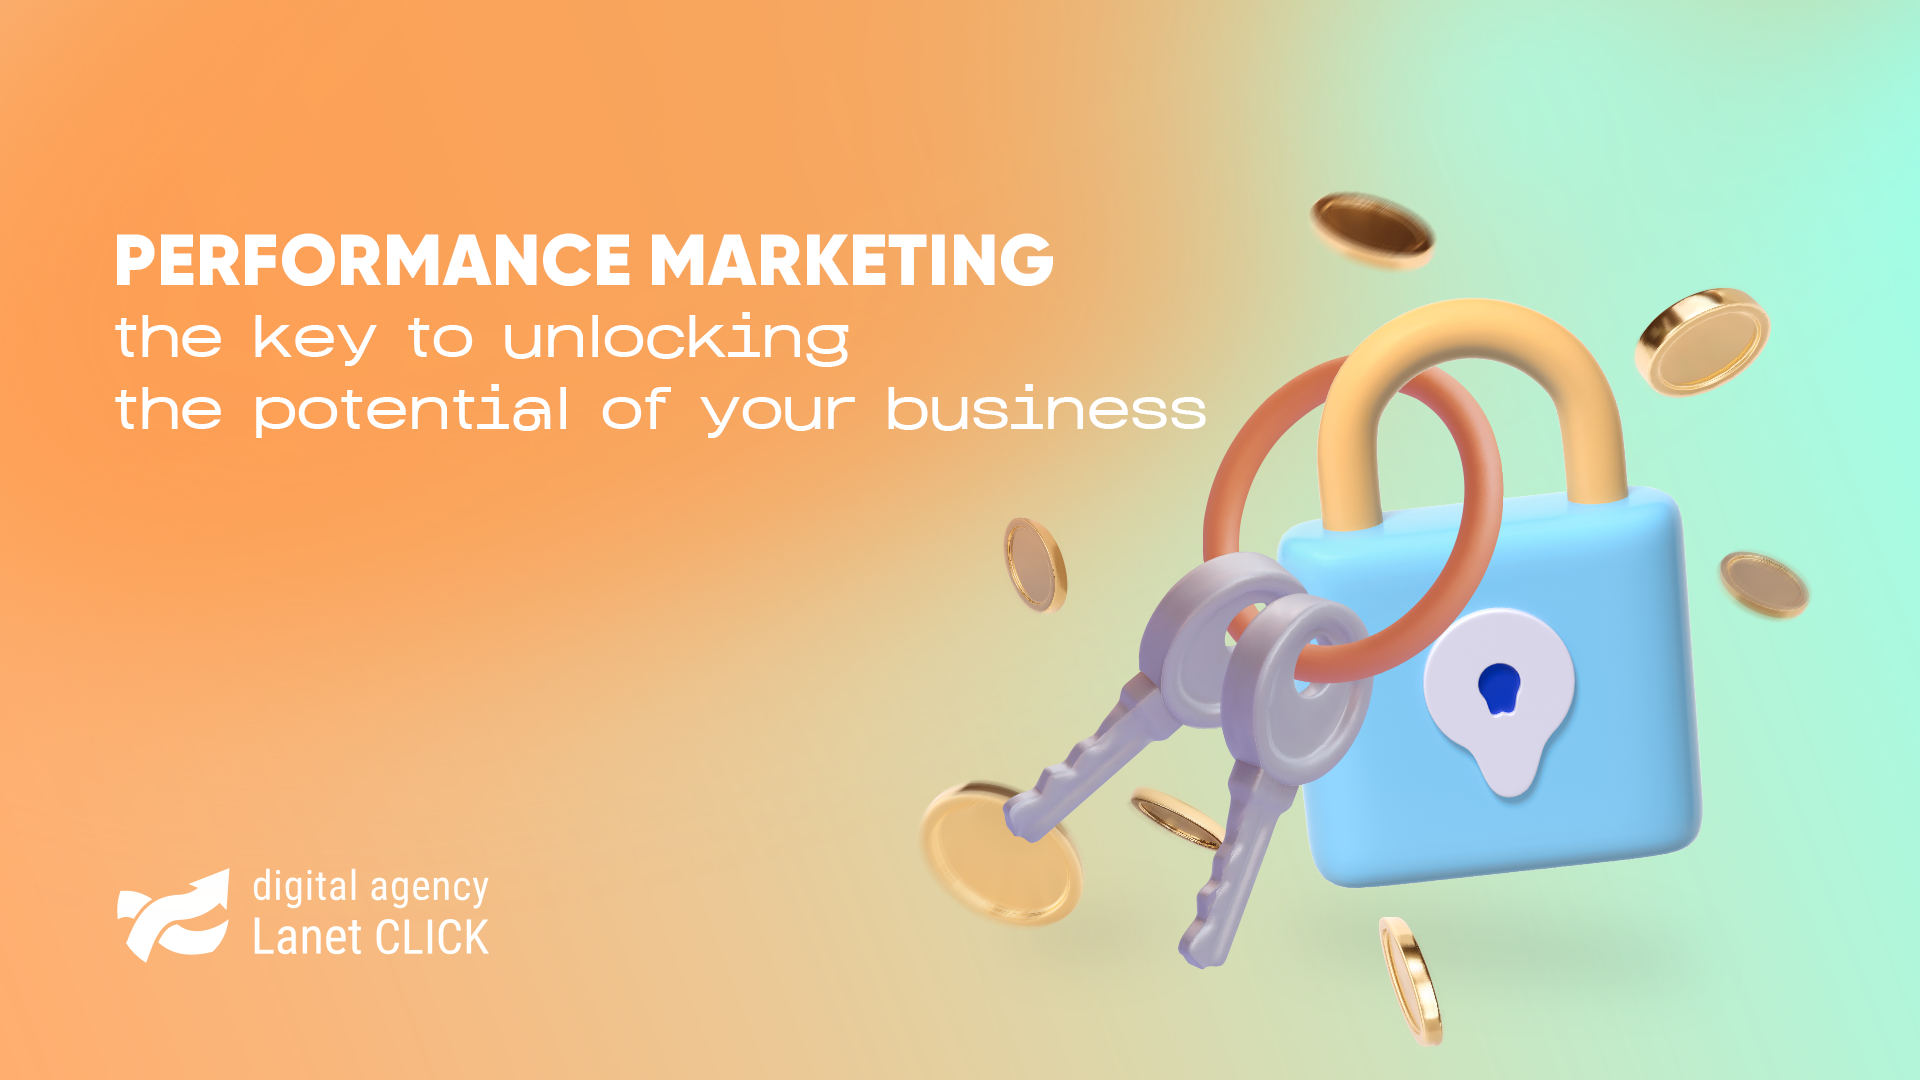 Performance marketing: the key to unlocking the potential of your business